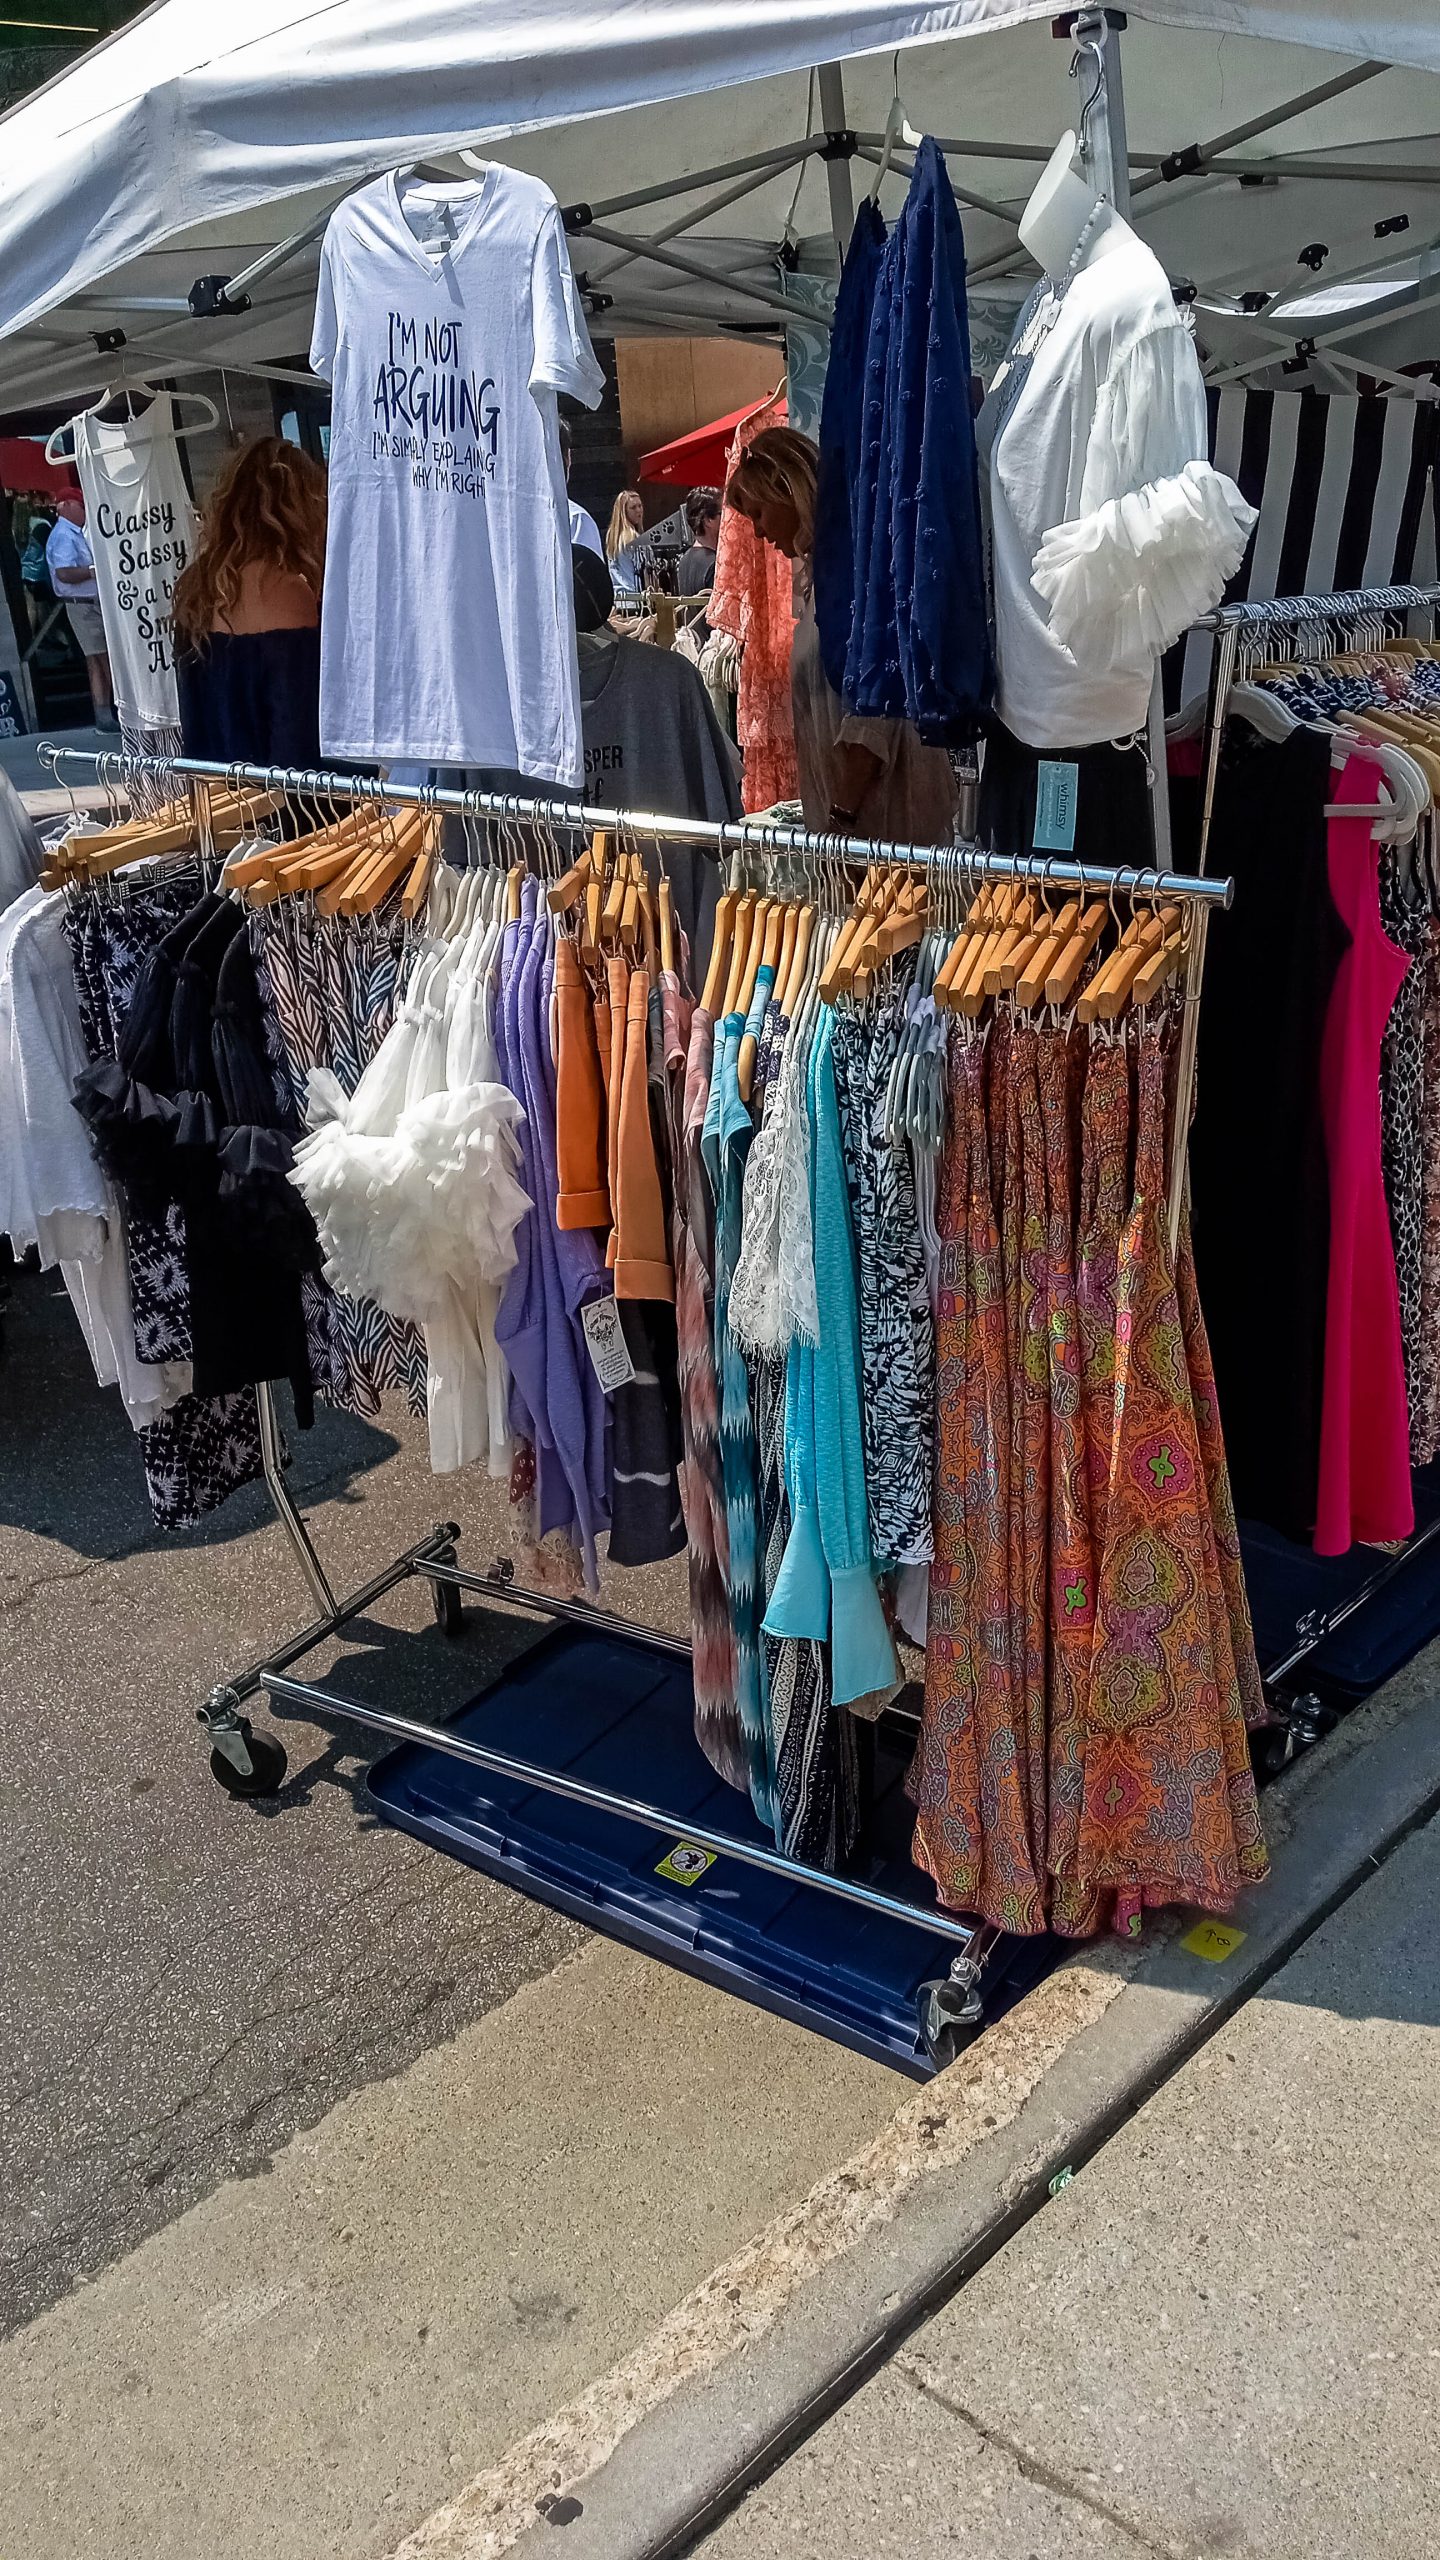 Dresses, shirts, and other clothes hang at this vendor's shop.